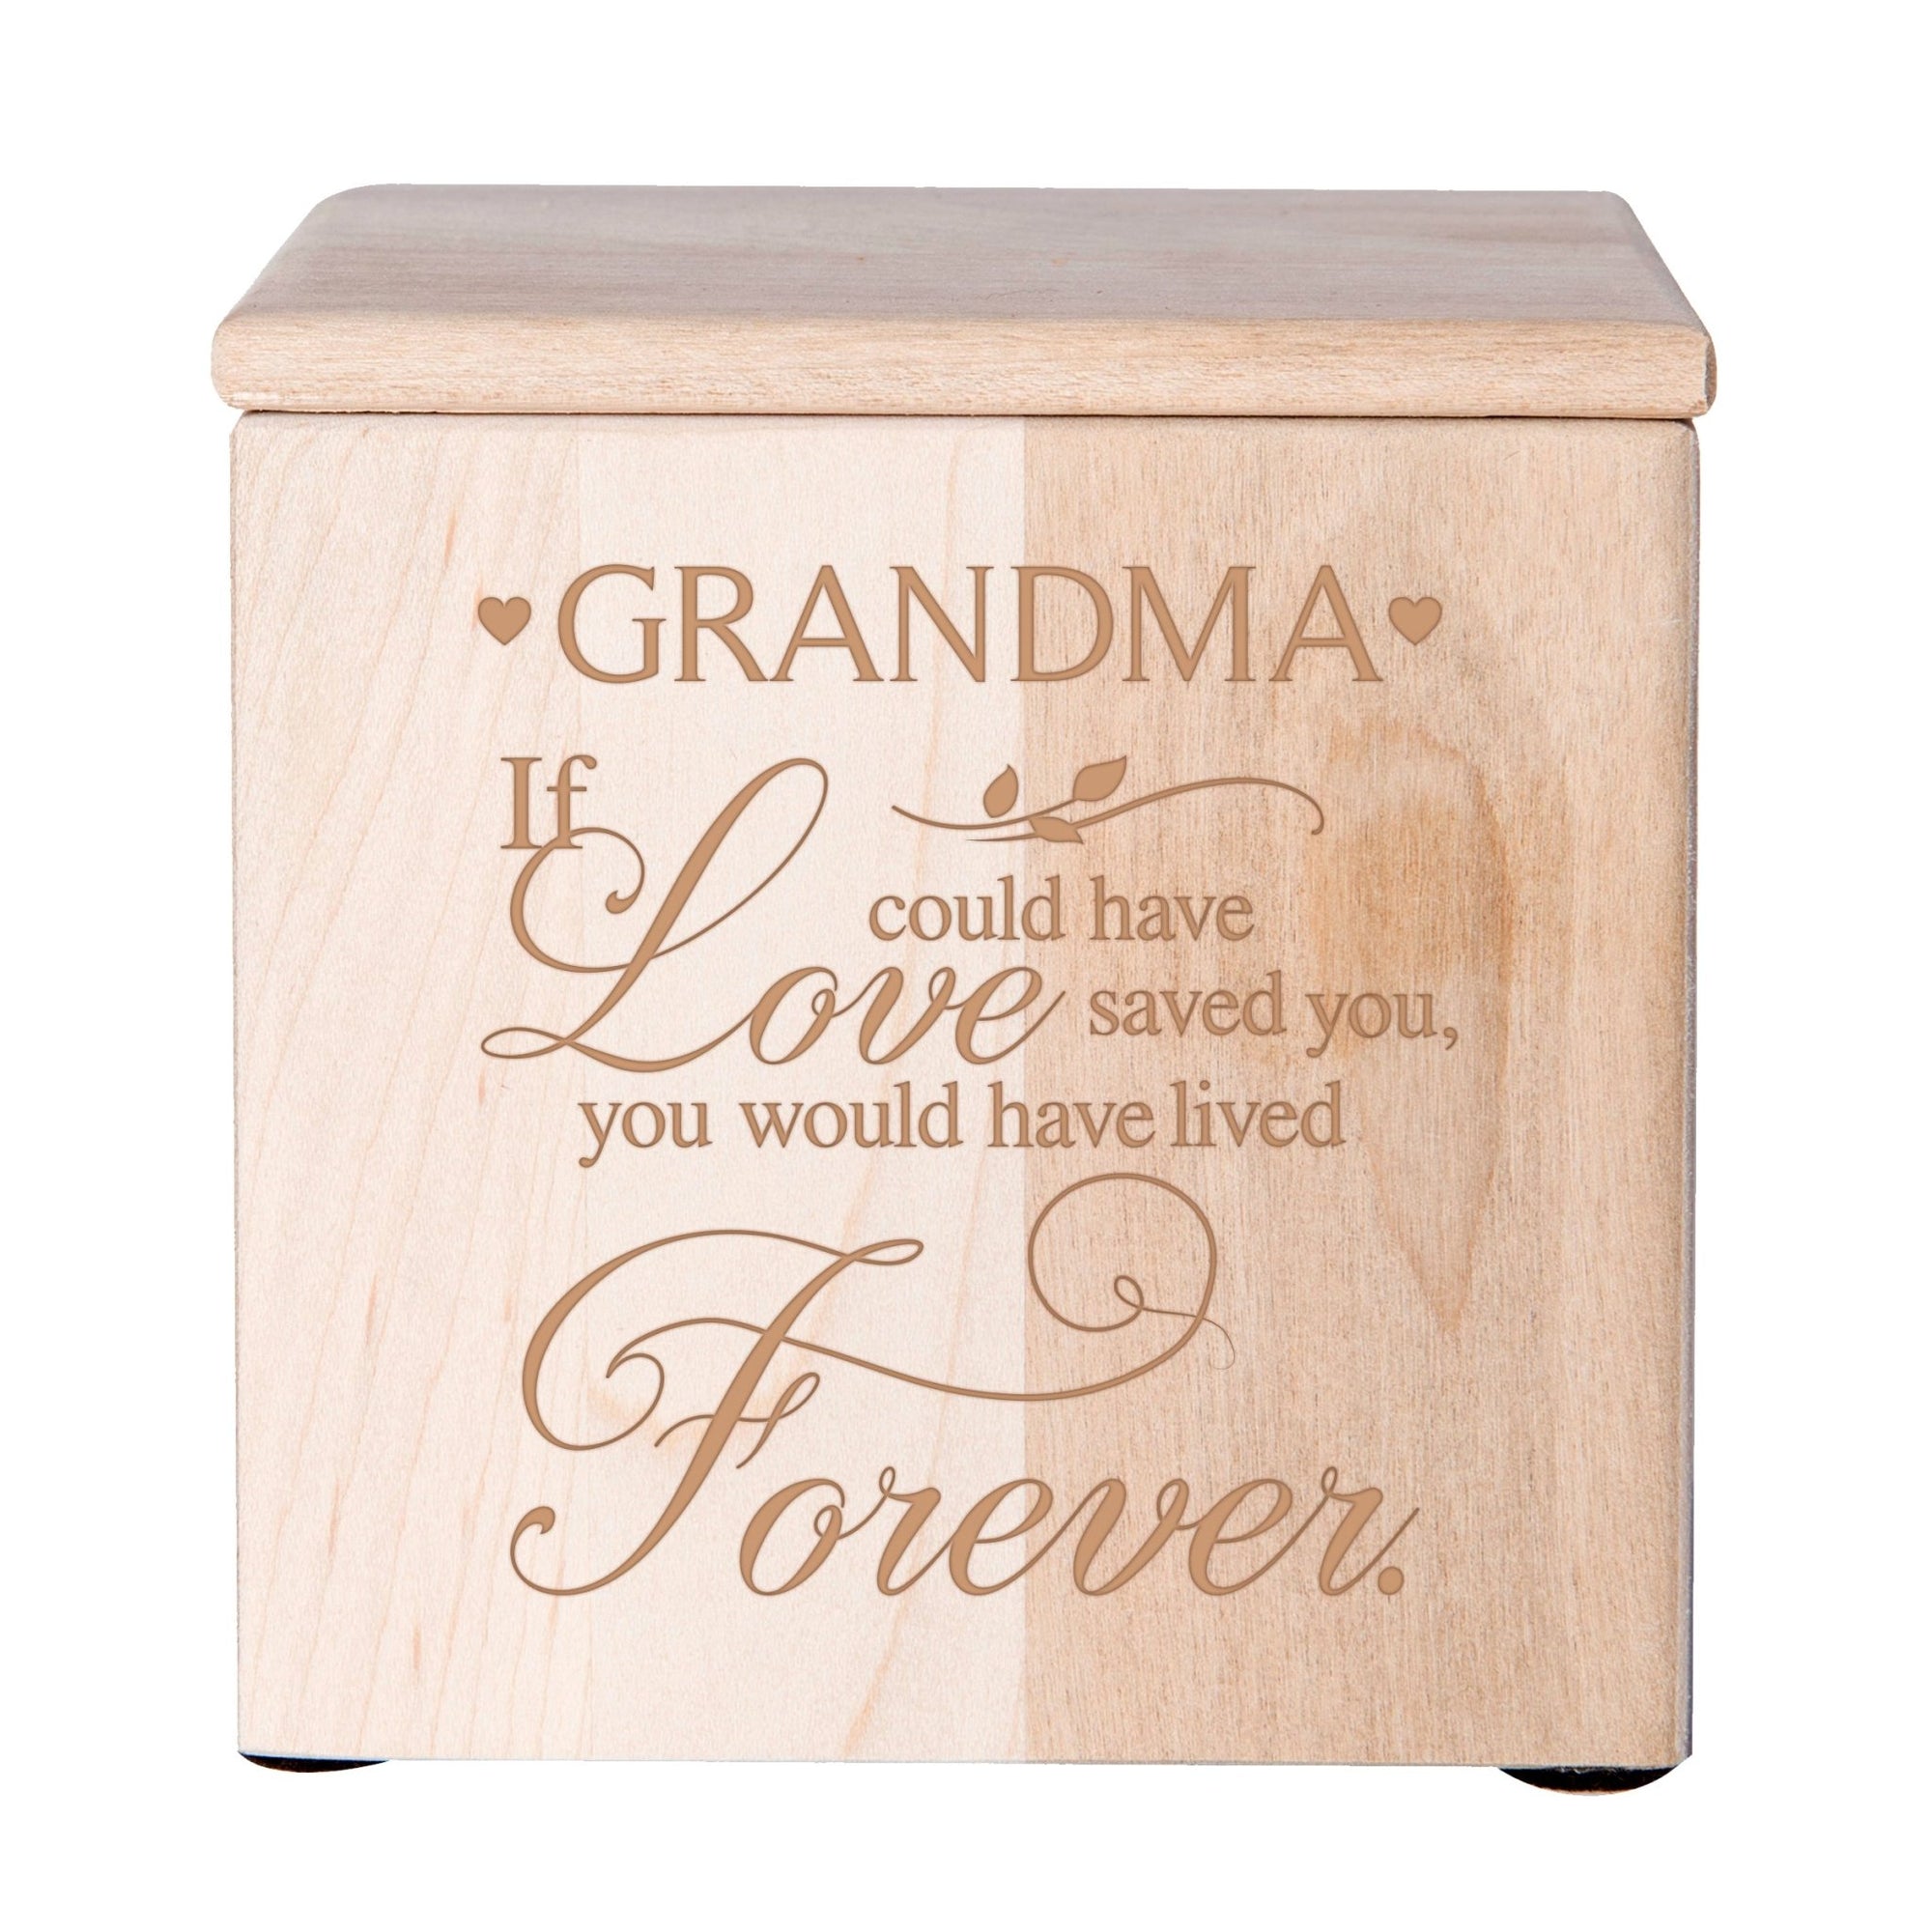 Modern Inspirational Memorial Wooden Cremation Urn Box 4.5x4.5in Holds 49 Cu Inches Of Human Ashes (If love could have saved Grandma) Funeral and Commemorative Keepsake - LifeSong Milestones